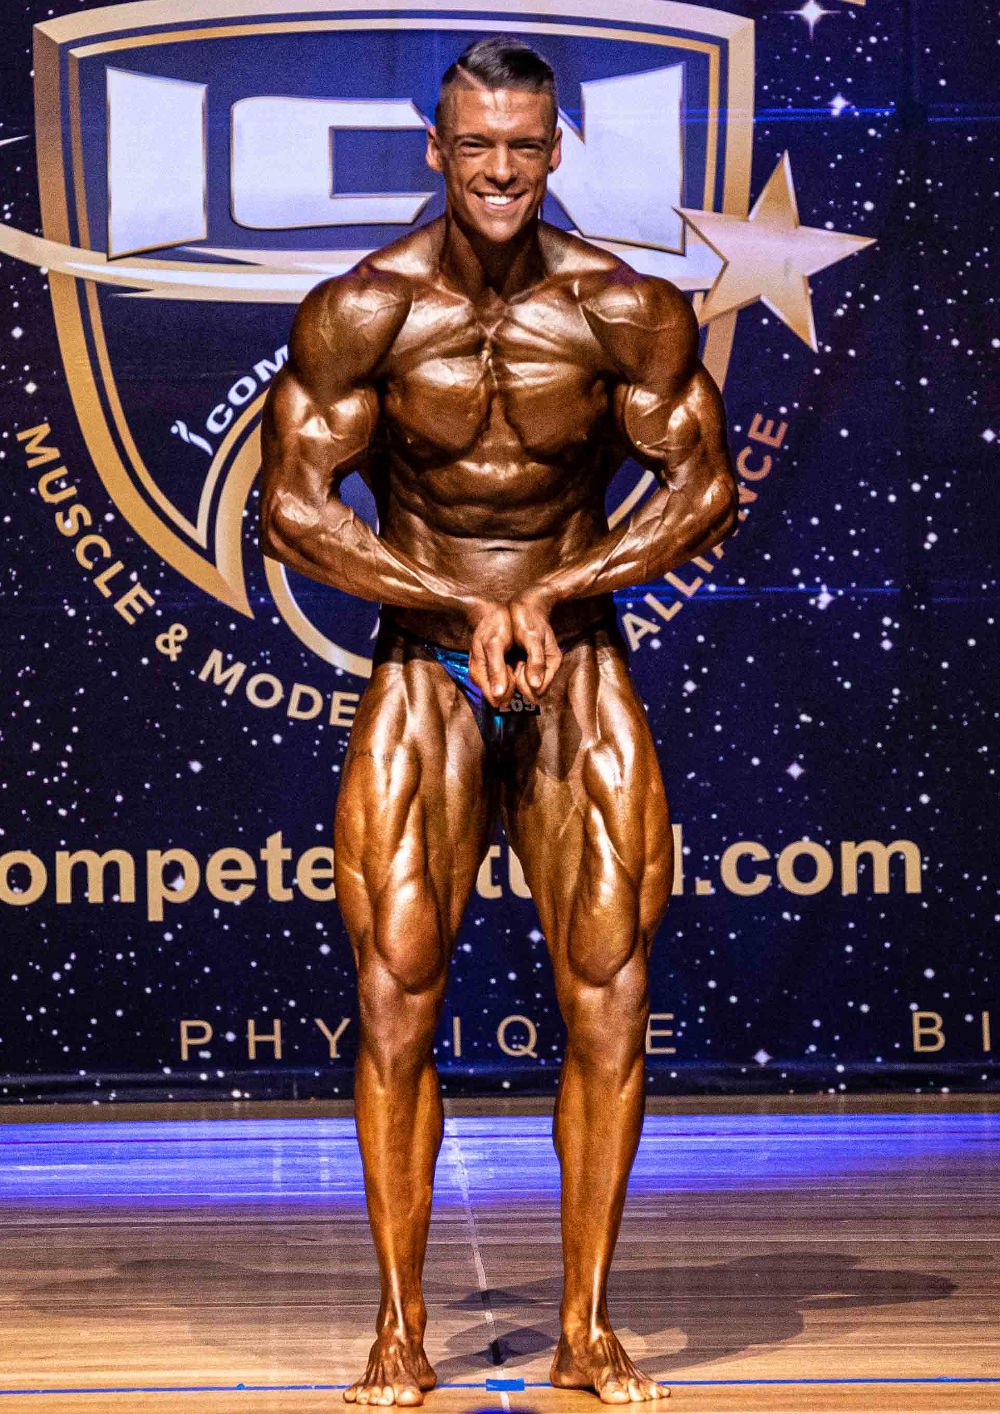 Why is the vacuum pose no longer performed on stage in modern bodybuilding  at the Mr. Olympia? - Quora